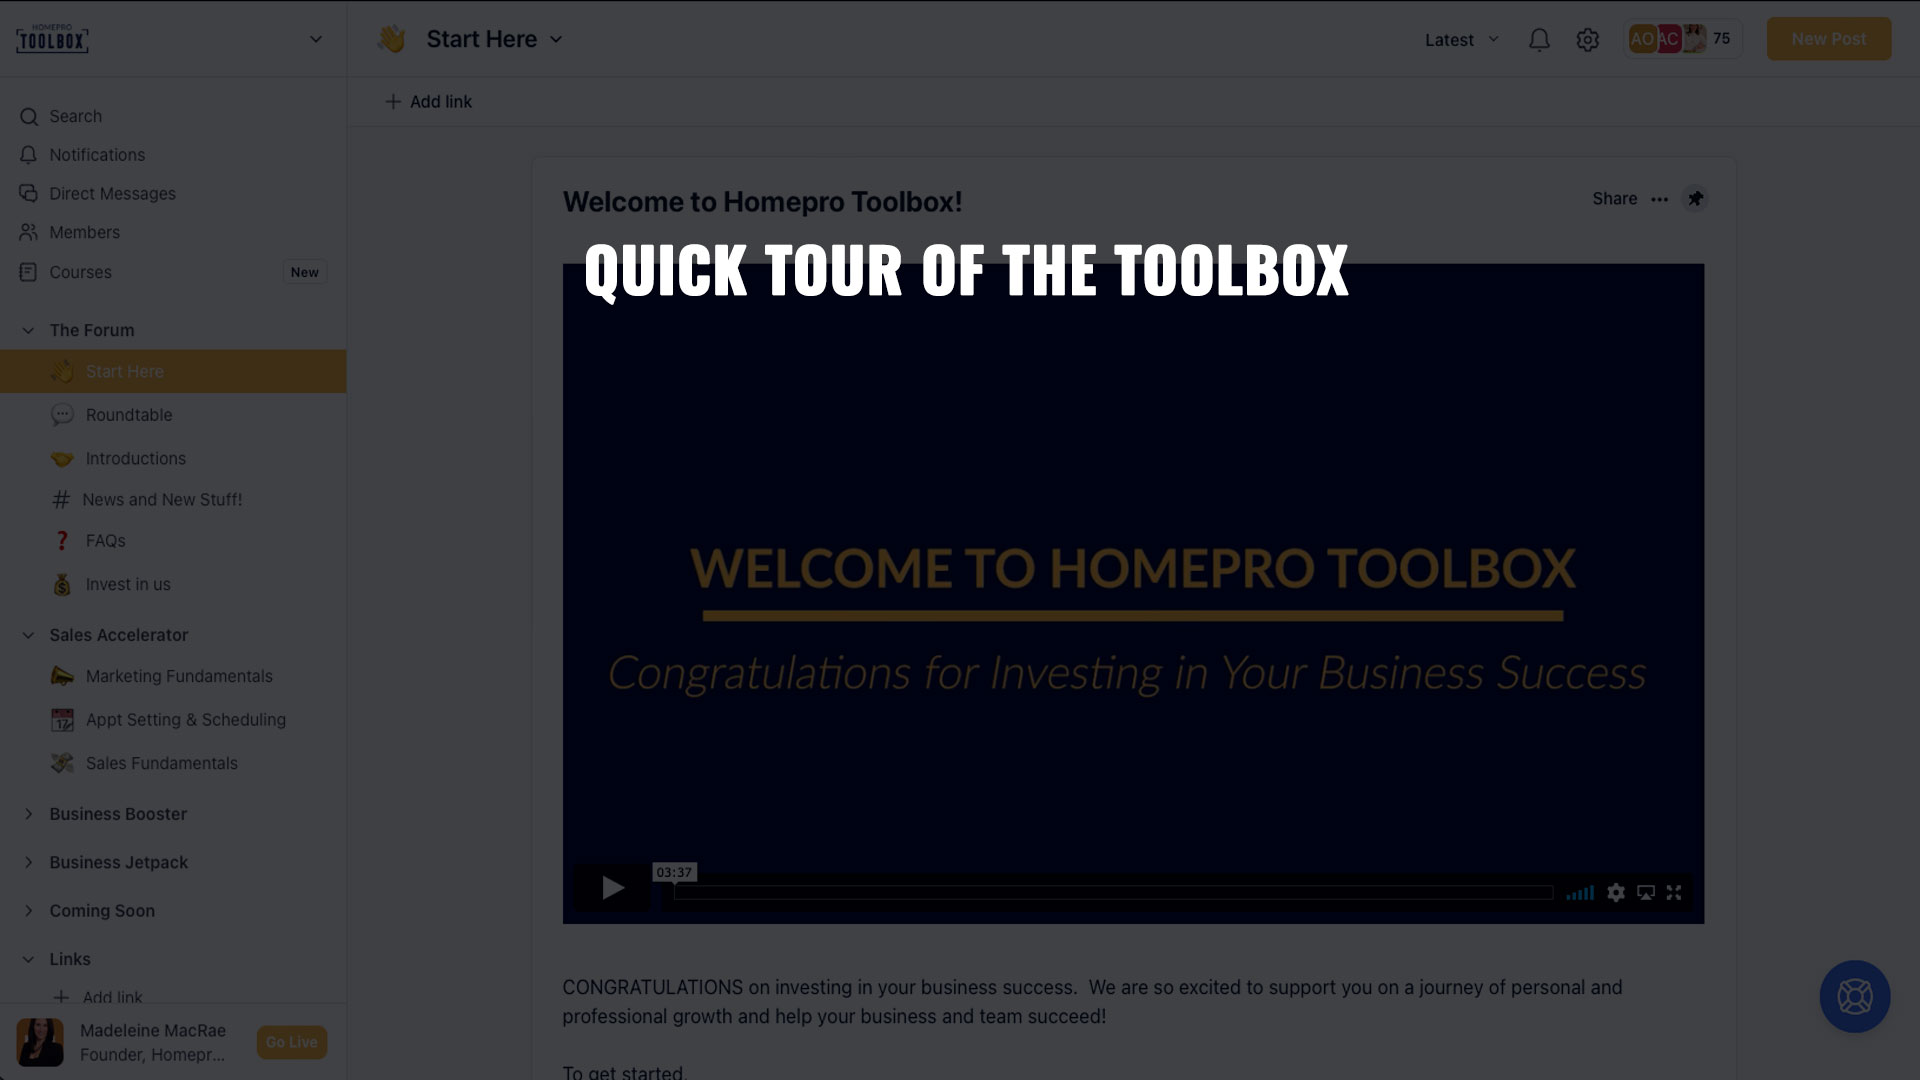 Homepro Toolbox Video Tour